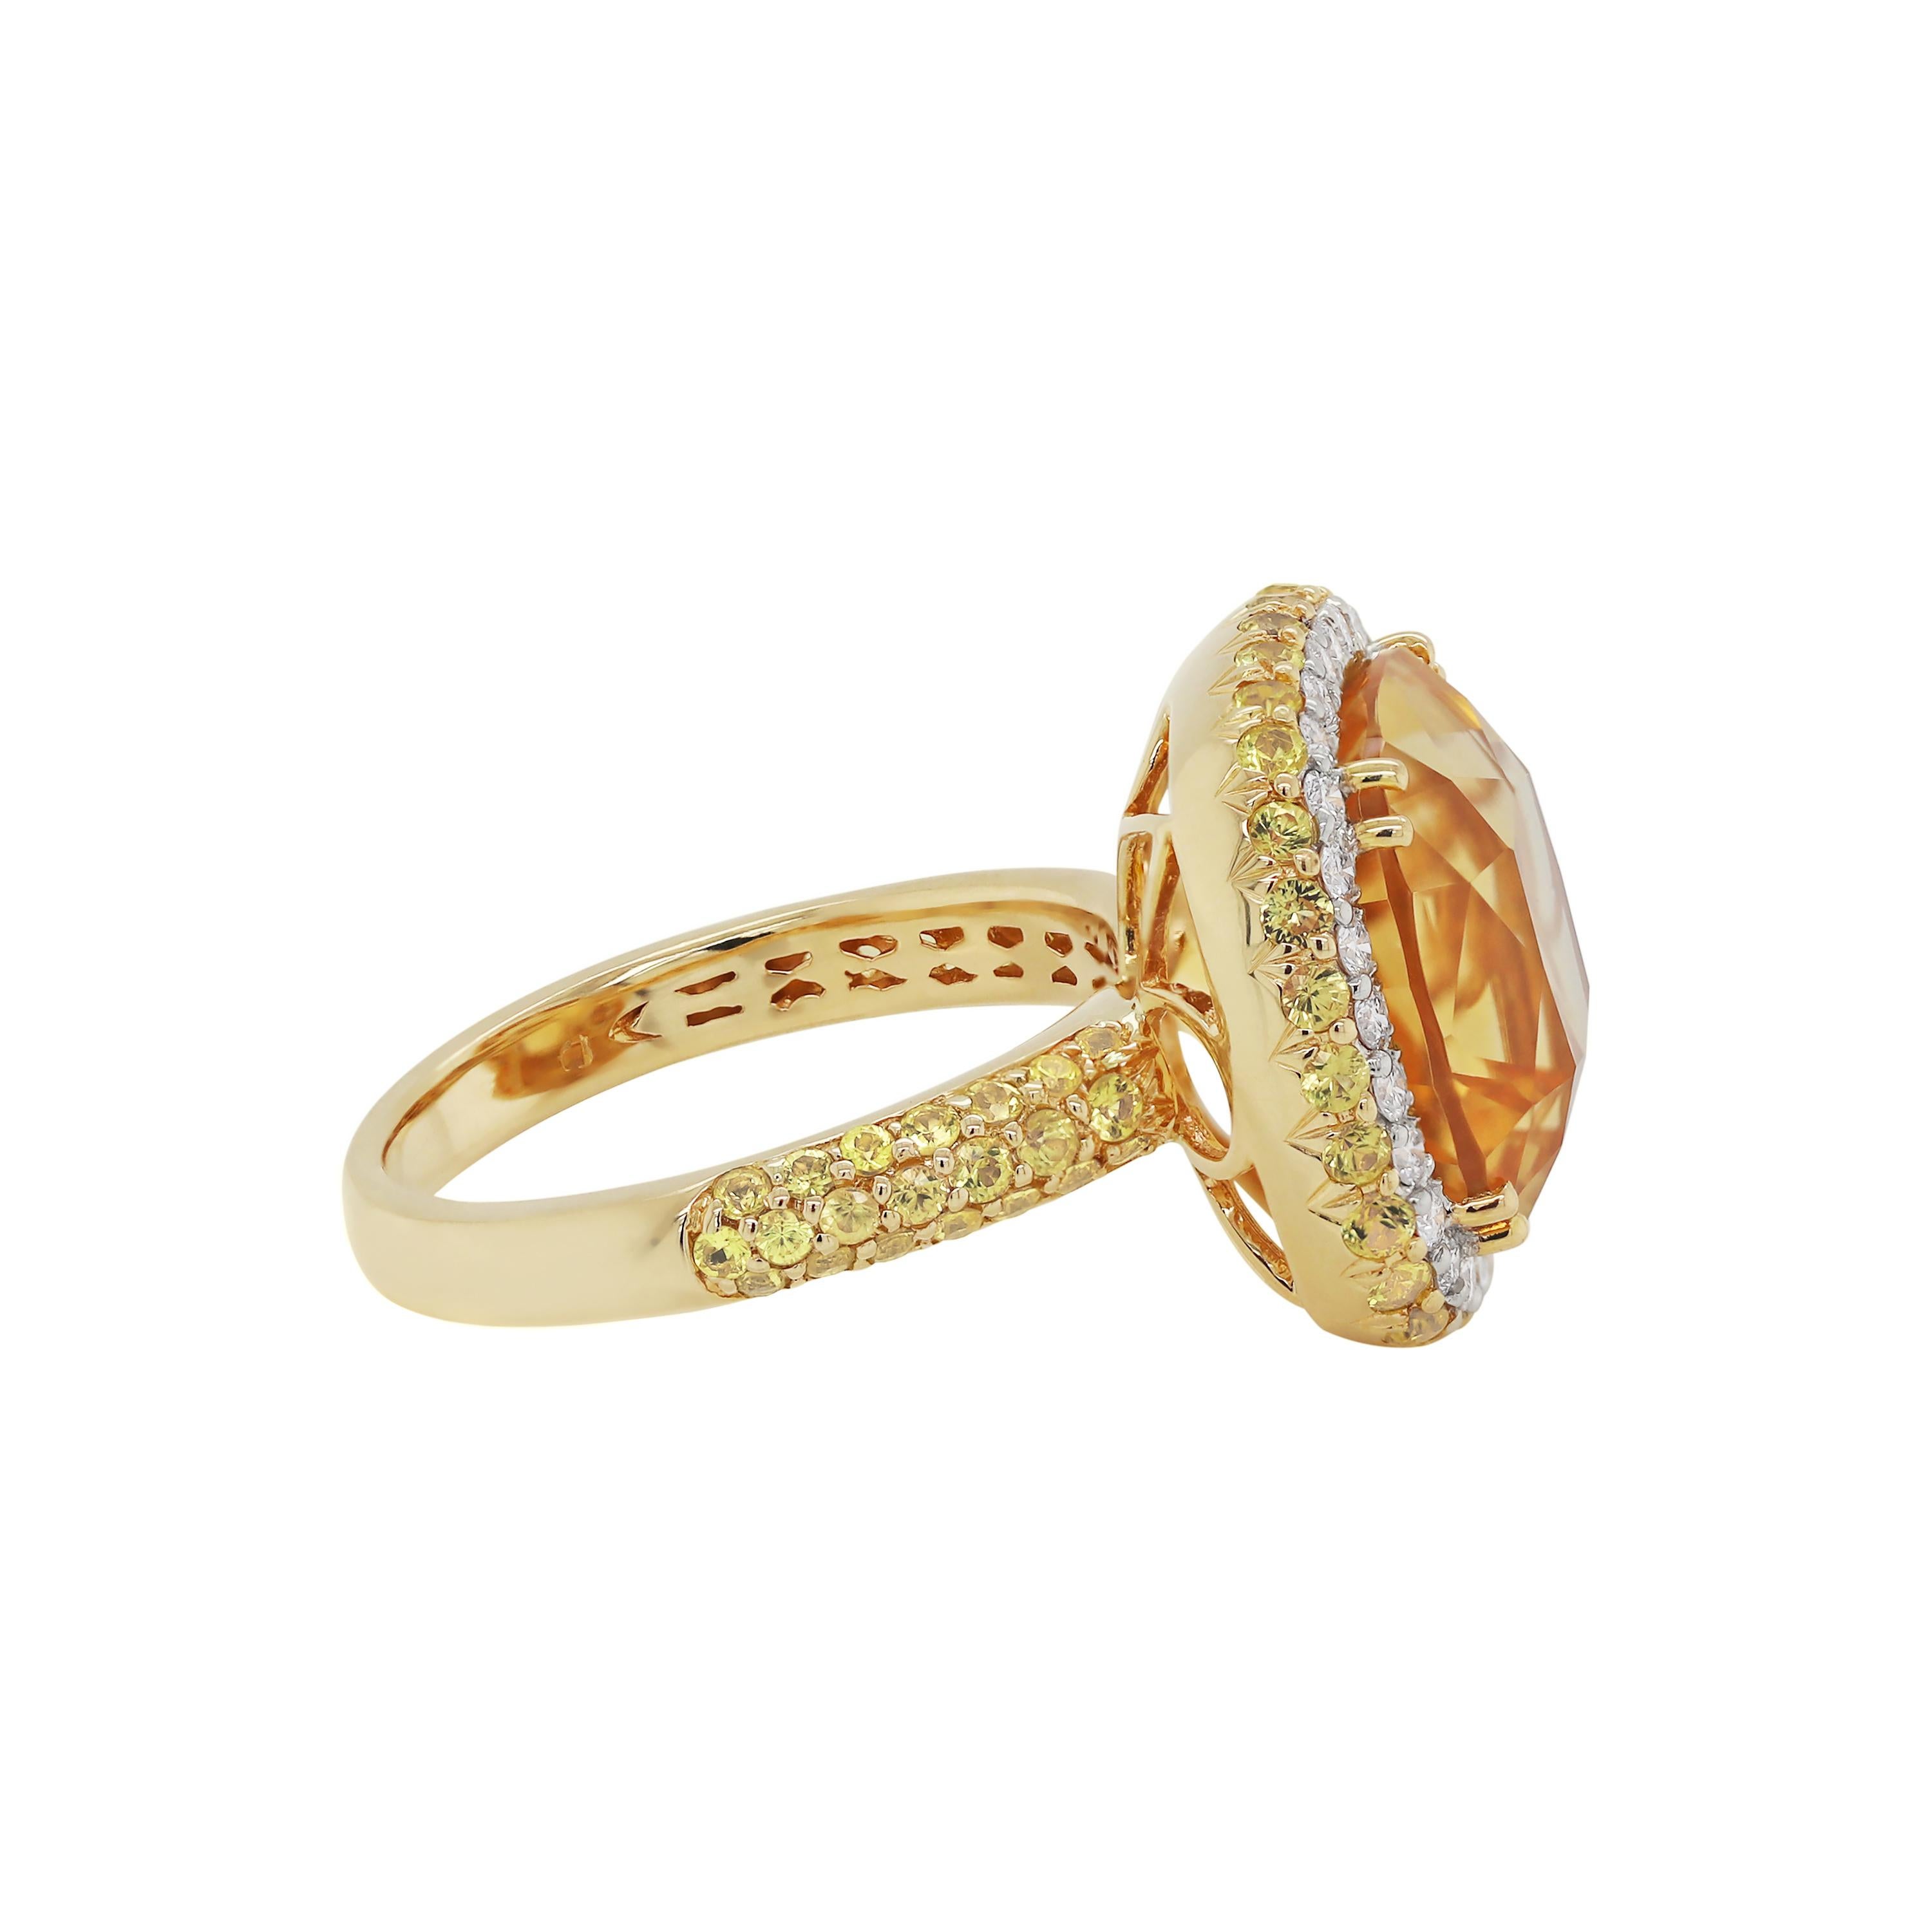 This modern ring features a golden coloured cushion cut citrine measuring 13x13mm and 9mm in depth, claw set in the centre. The beautiful stone is surrounded by a halo of 28 fine quality round brilliant cut diamonds weighing an approximate total